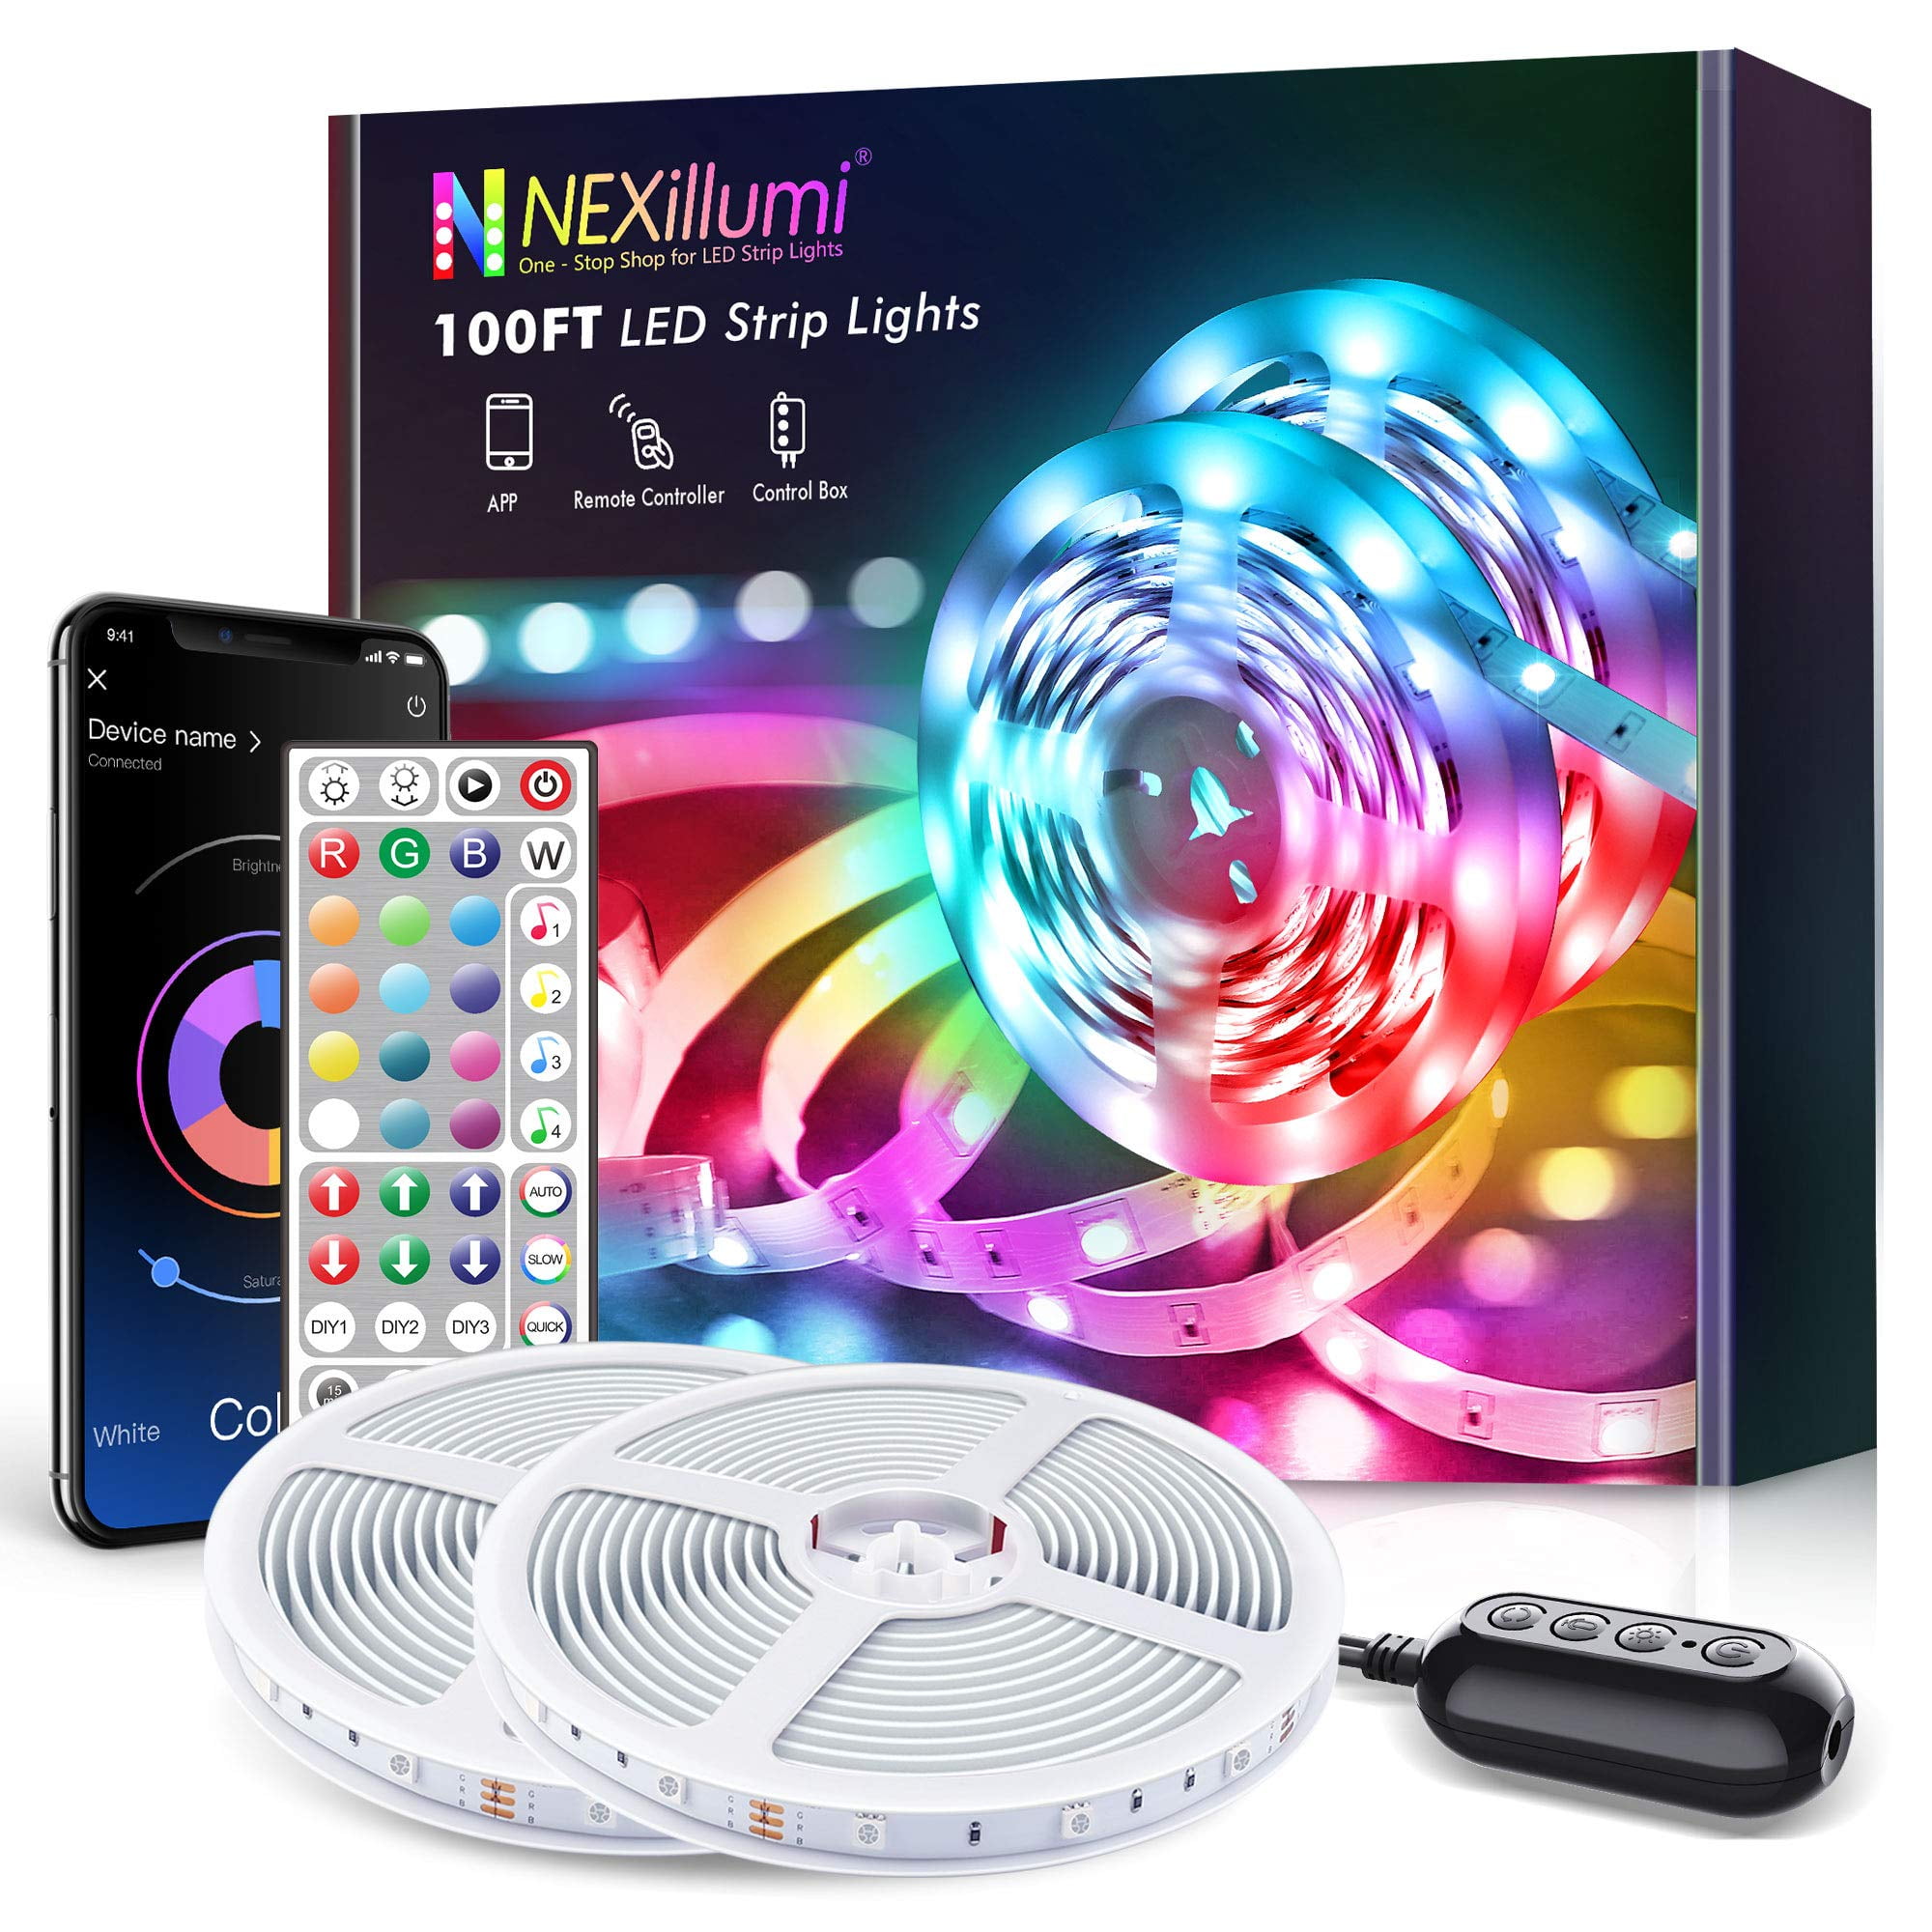 Govee Smart WiFi RGB LED Strip Lights Full Review - Unboxing, Setup and  Live Demos 